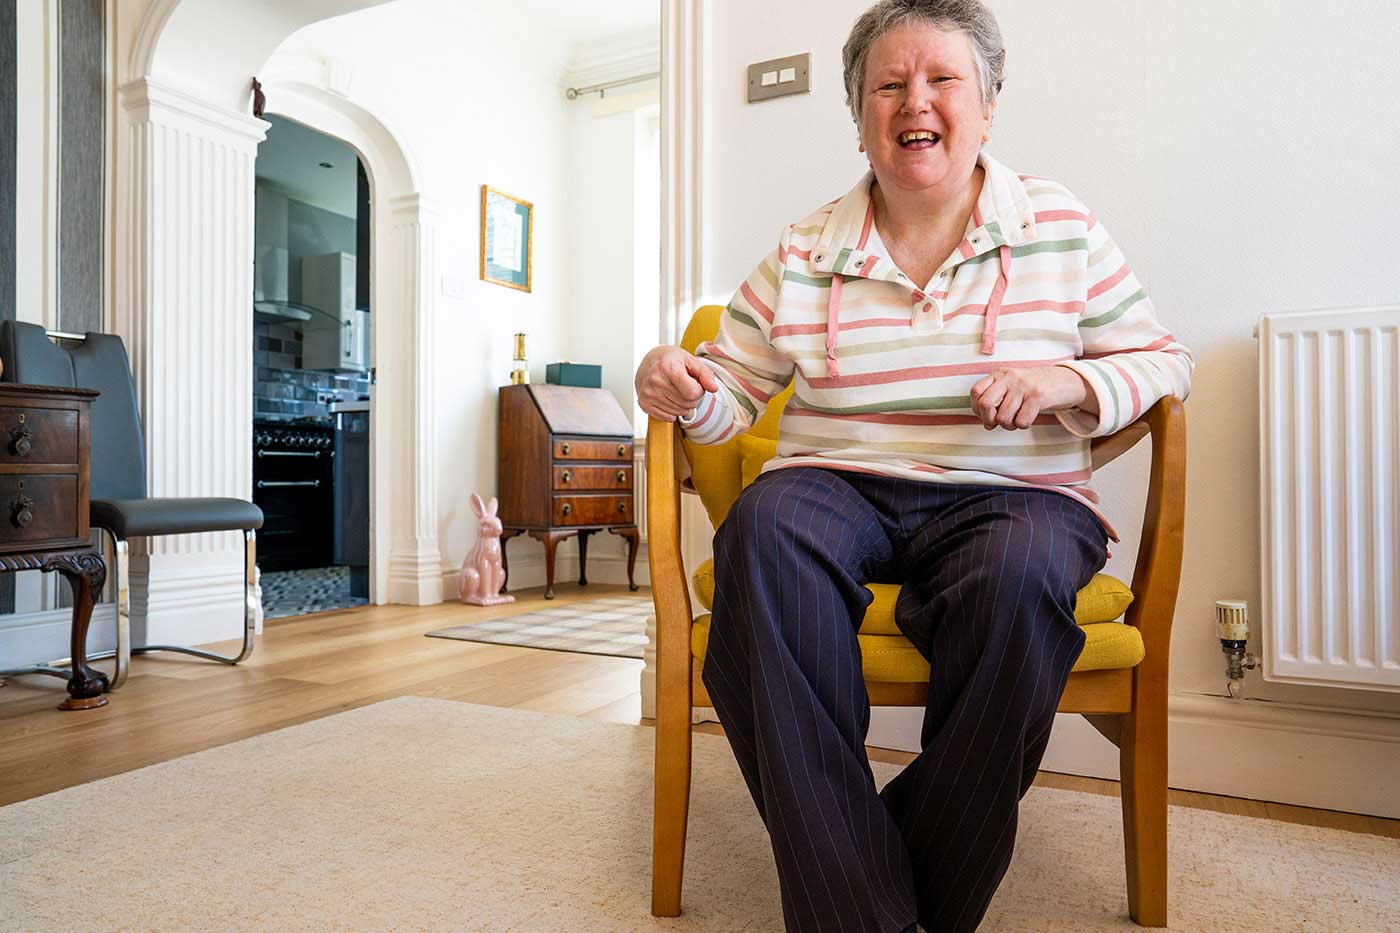 Lady in her living room, she is sat in a chair and smiling at the camera